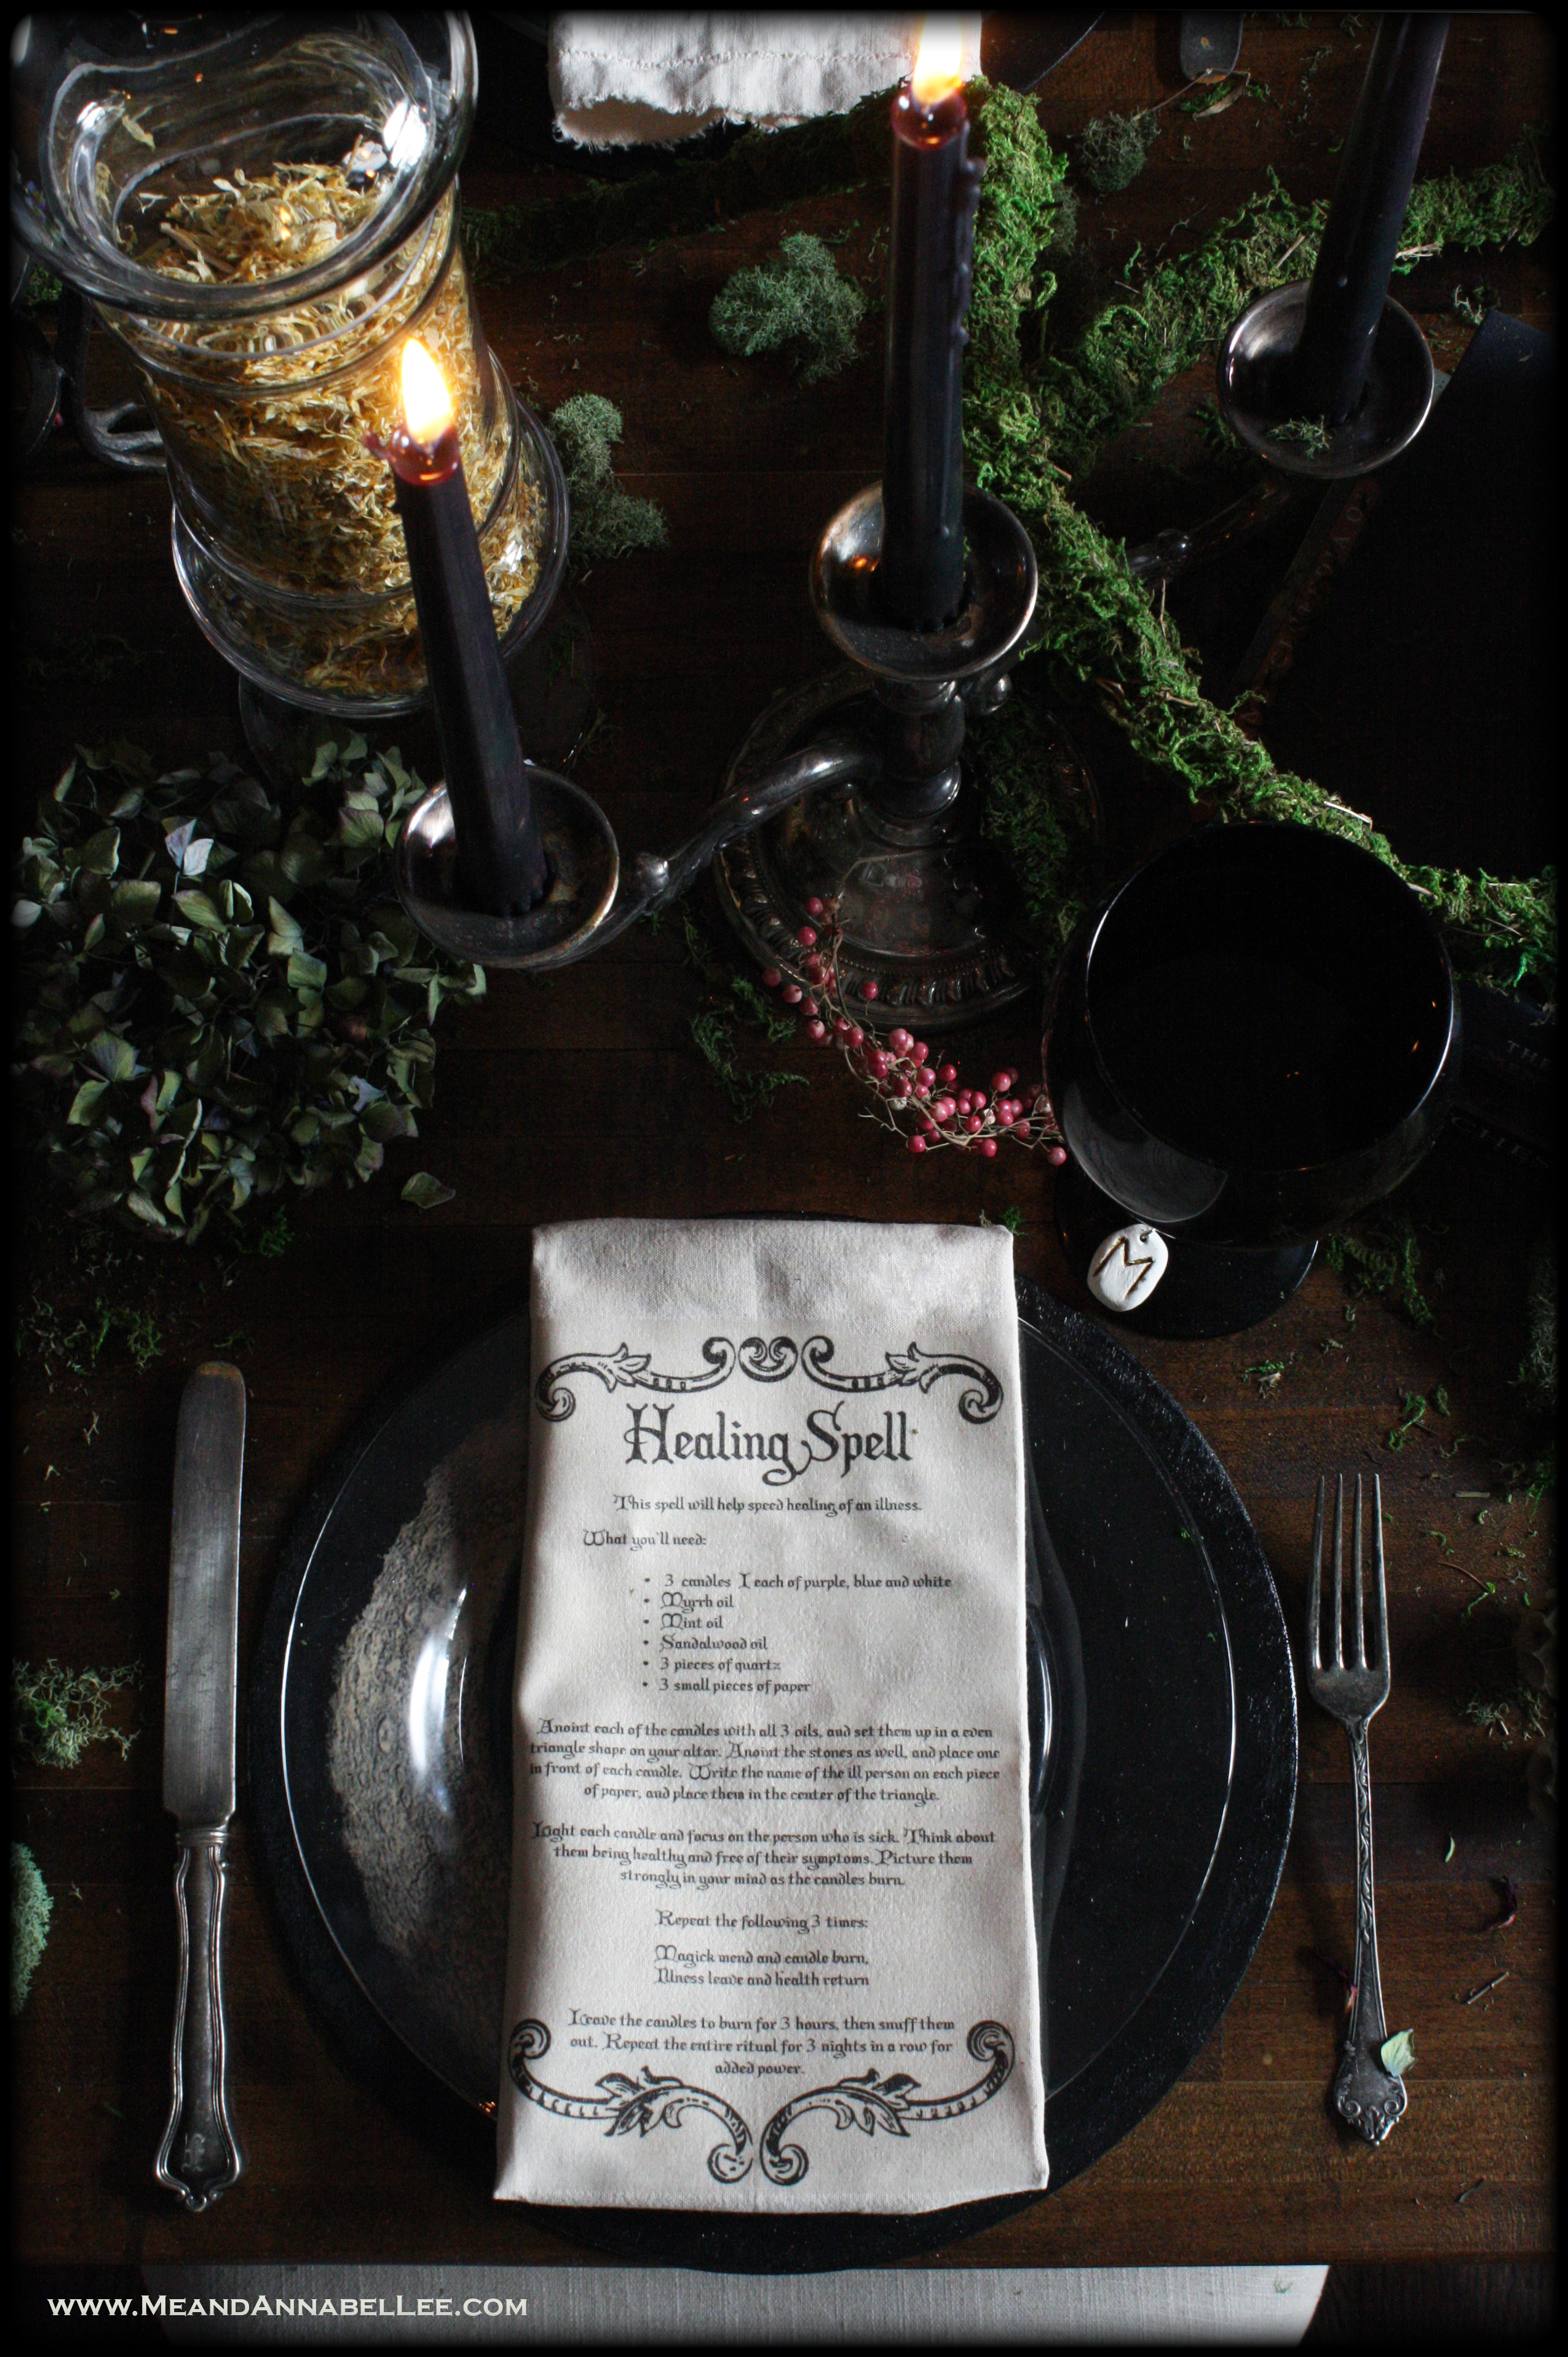 DIY Tea Stained Witches Spell Napkins | Samhain Dinner Party Table Setting | Healing Spell | Halloween Crafts | Image Transfer | www.MeandAnnabelLee.com